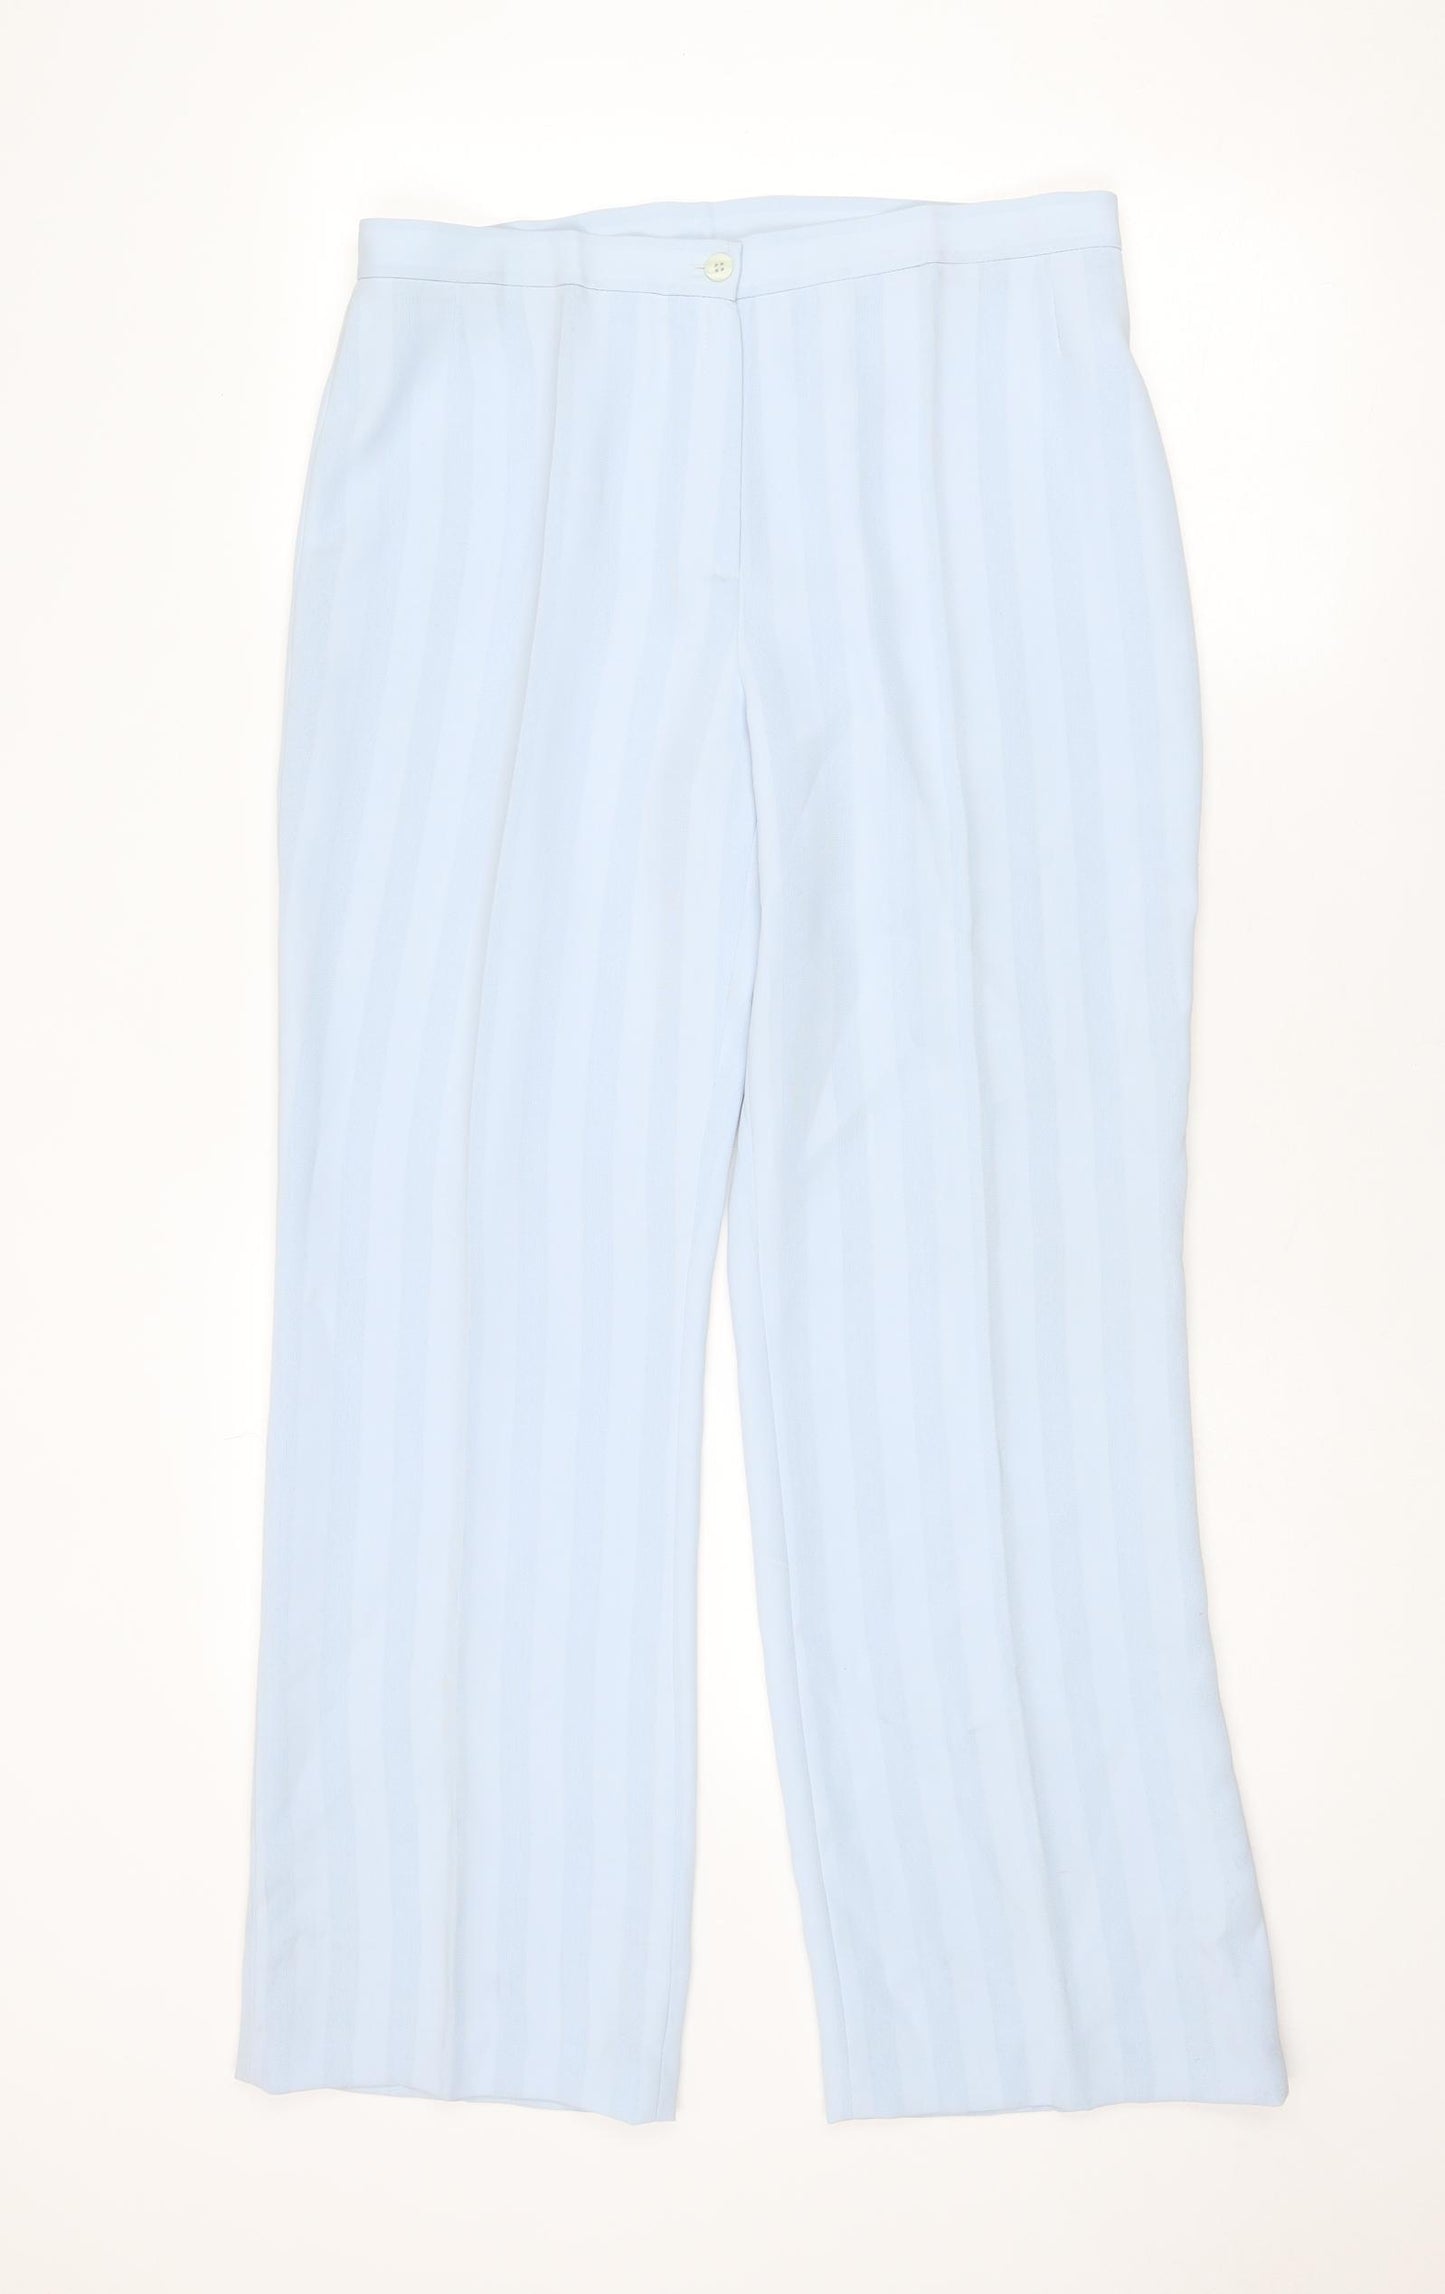 Busy Womens Blue Striped Polyester Trousers Size 14 Regular Zip